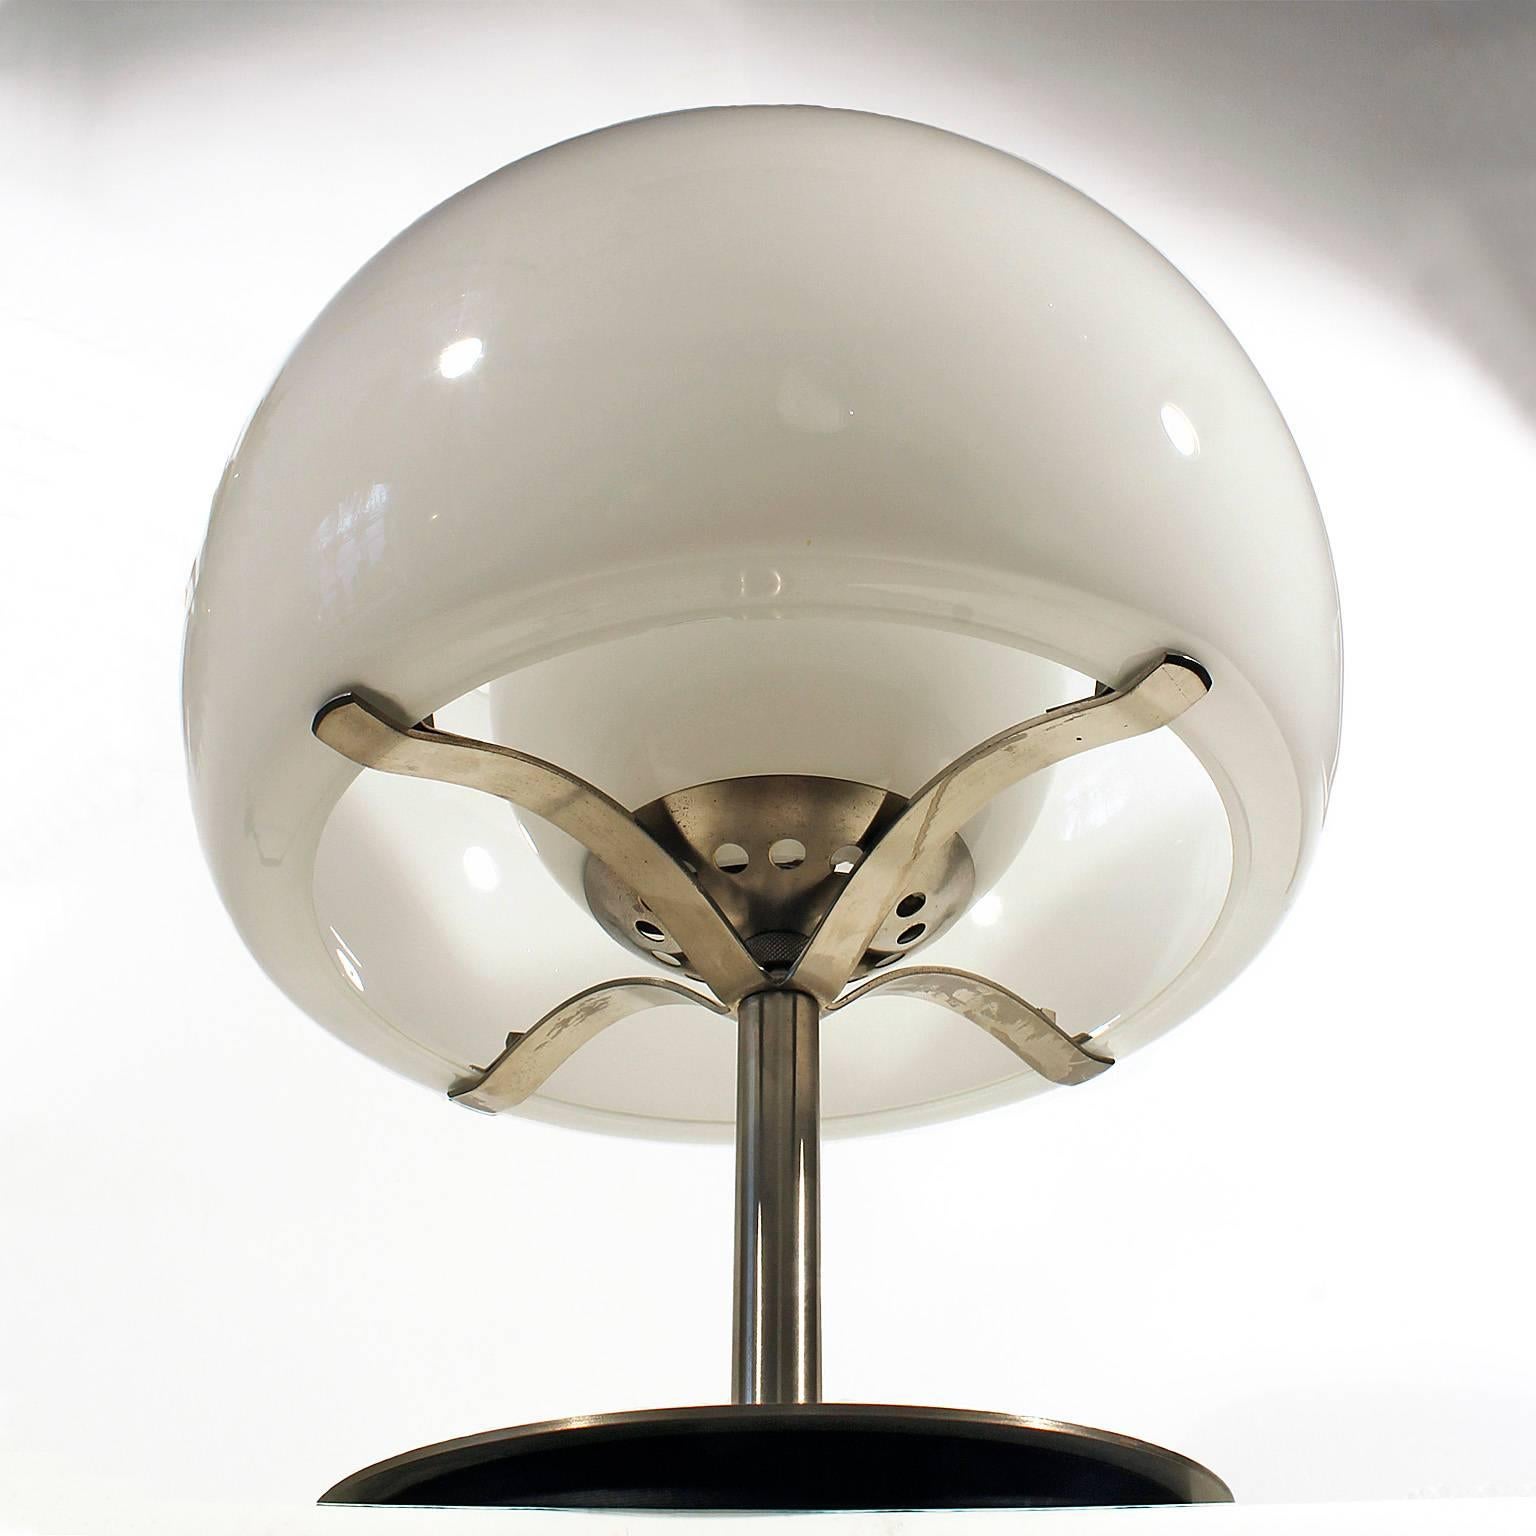 Plated 1970´s Pair of Erse Lamps by Vico Magistretti for Artemide - Italy